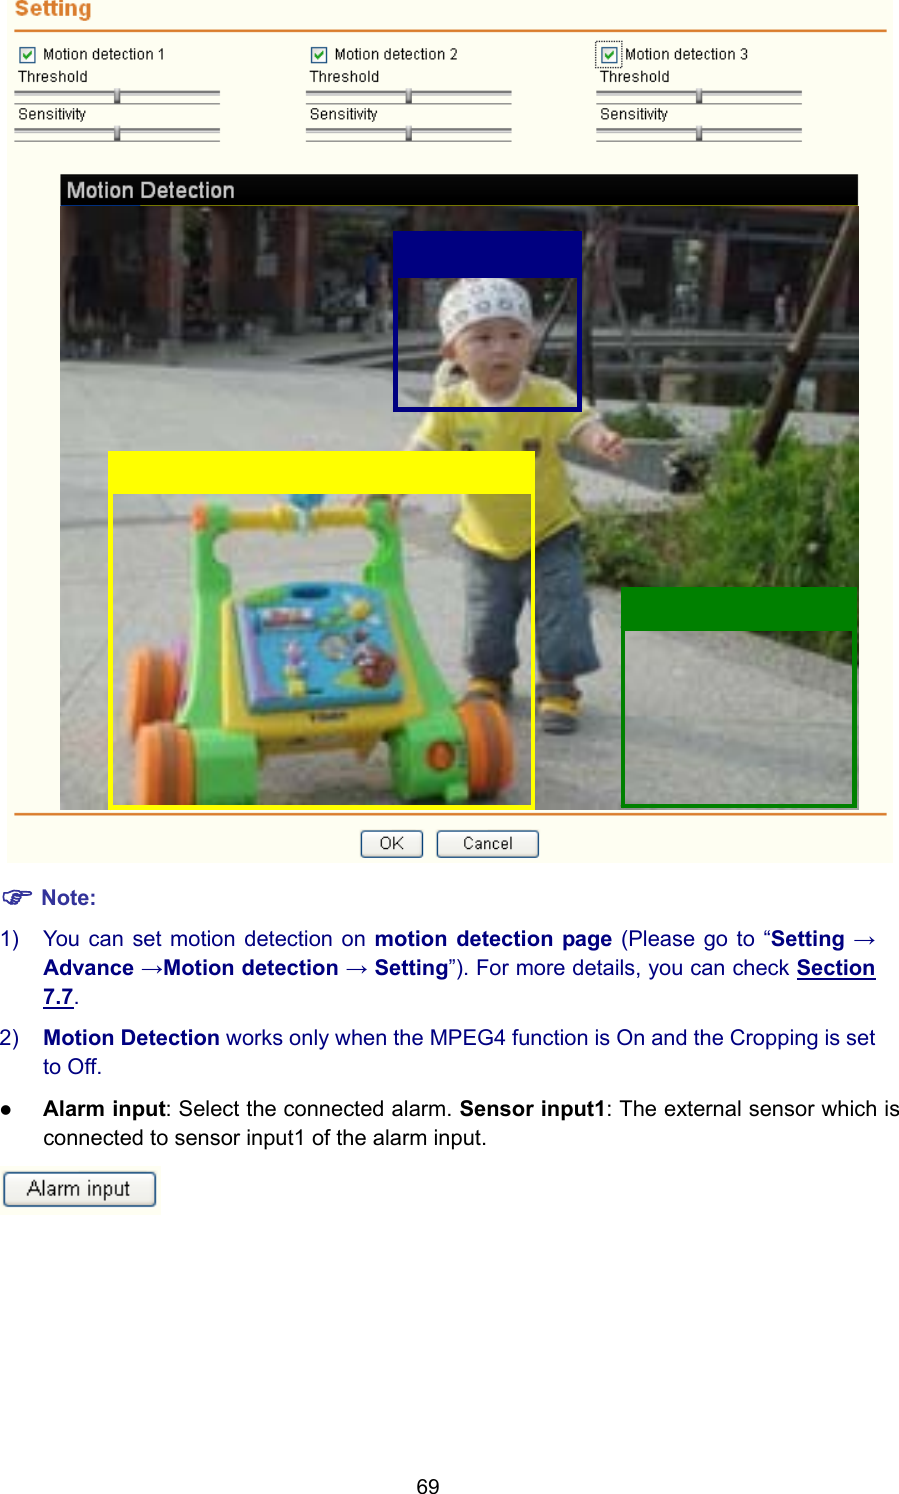 69  ) Note: 1)  You can set motion detection on motion detection page (Please go to “Setting → Advance →Motion detection → Setting”). For more details, you can check Section 7.7. 2)  Motion Detection works only when the MPEG4 function is On and the Cropping is set to Off. z Alarm input: Select the connected alarm. Sensor input1: The external sensor which is connected to sensor input1 of the alarm input.  